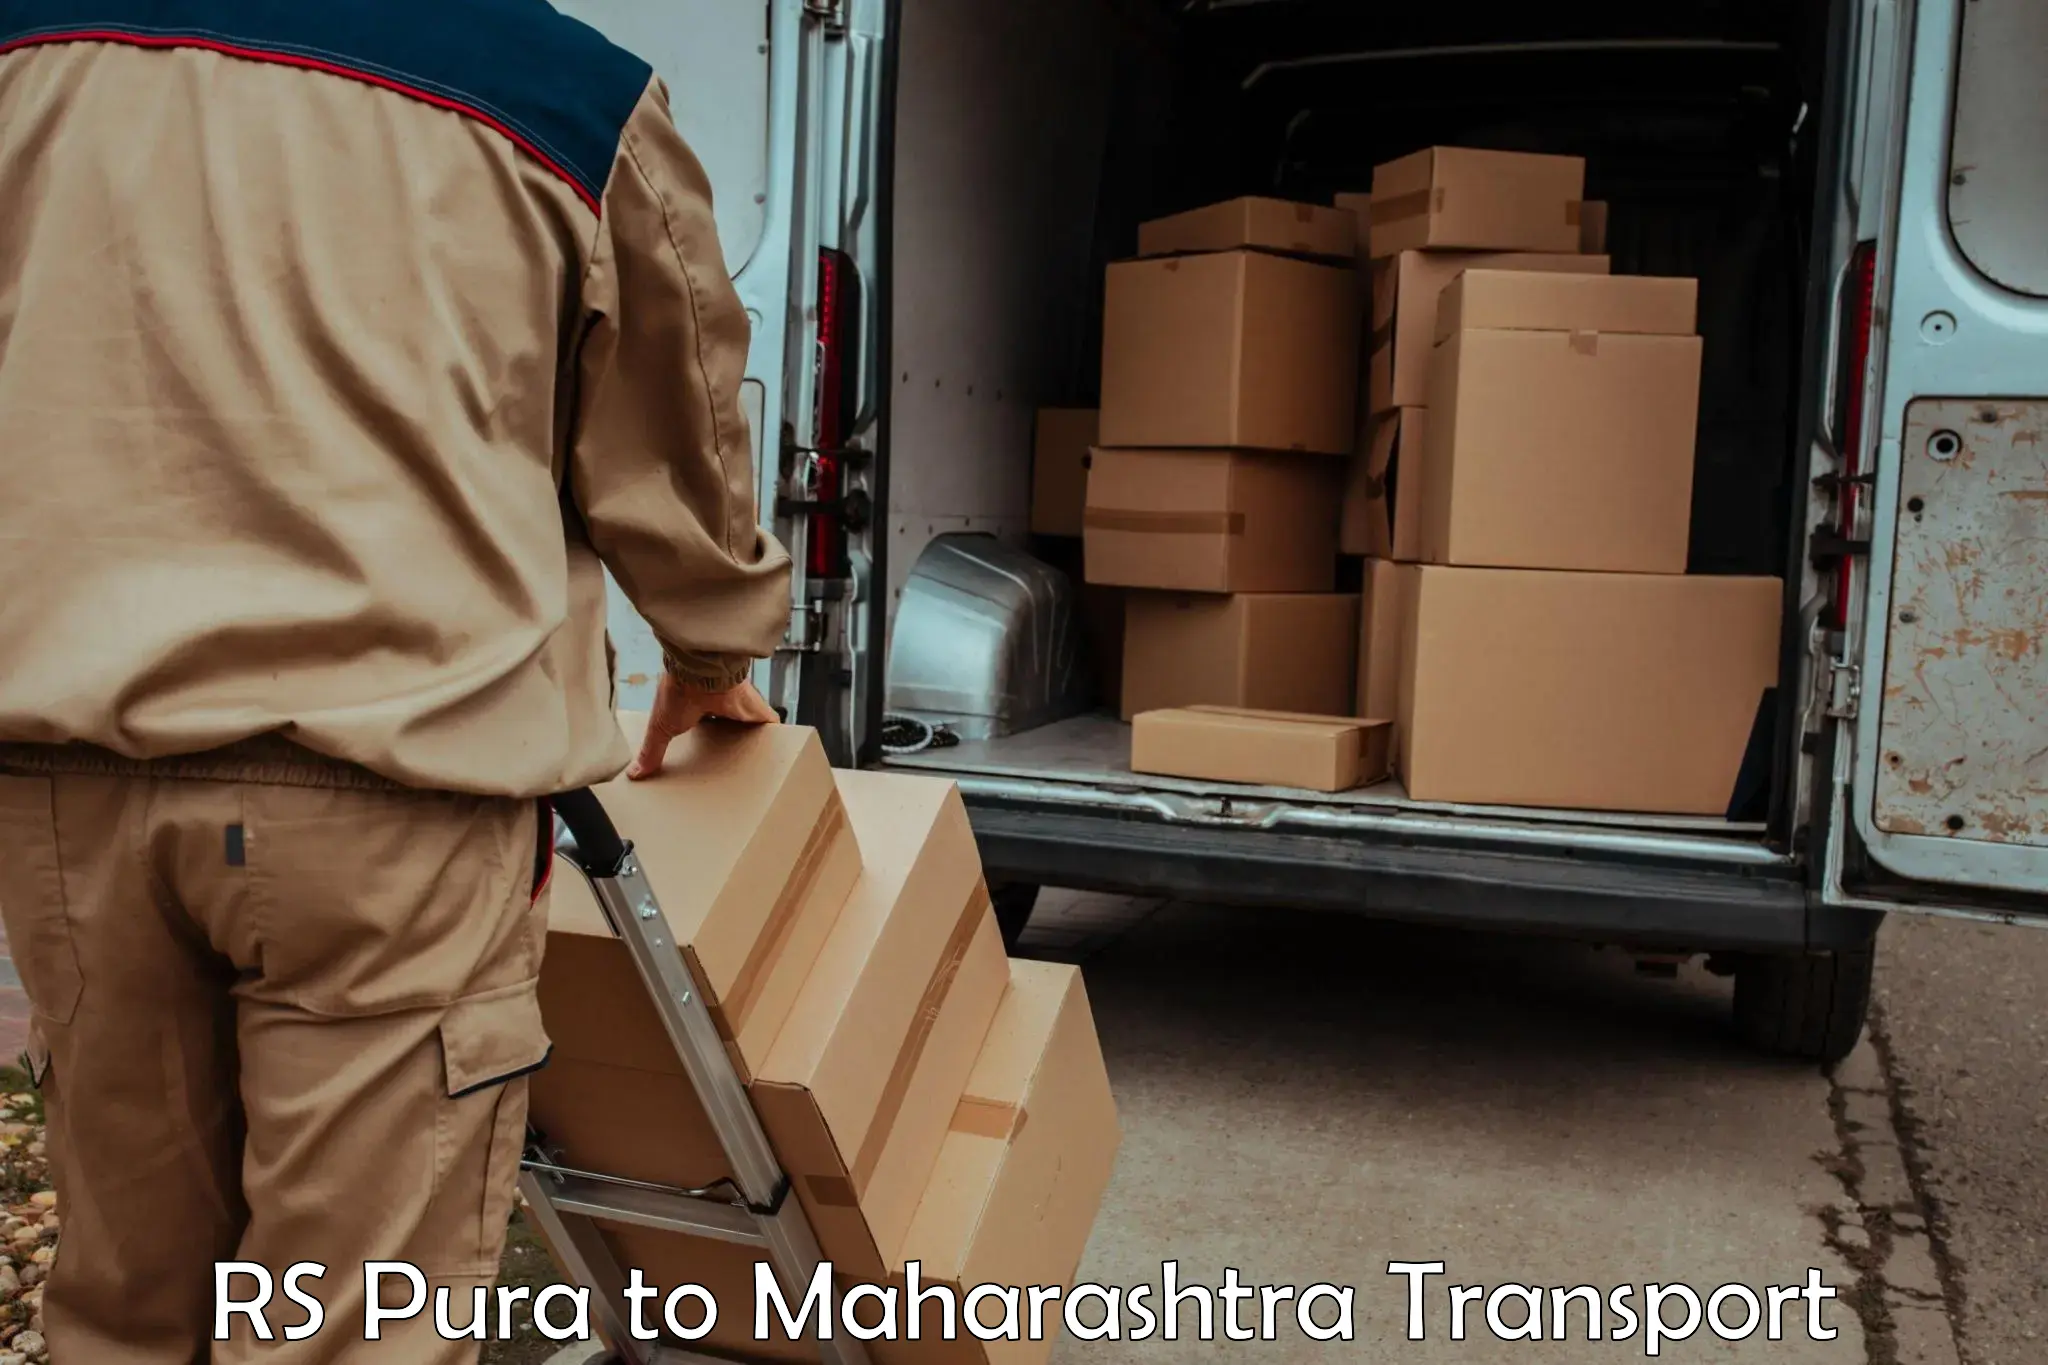 Cargo transport services in RS Pura to Lanja